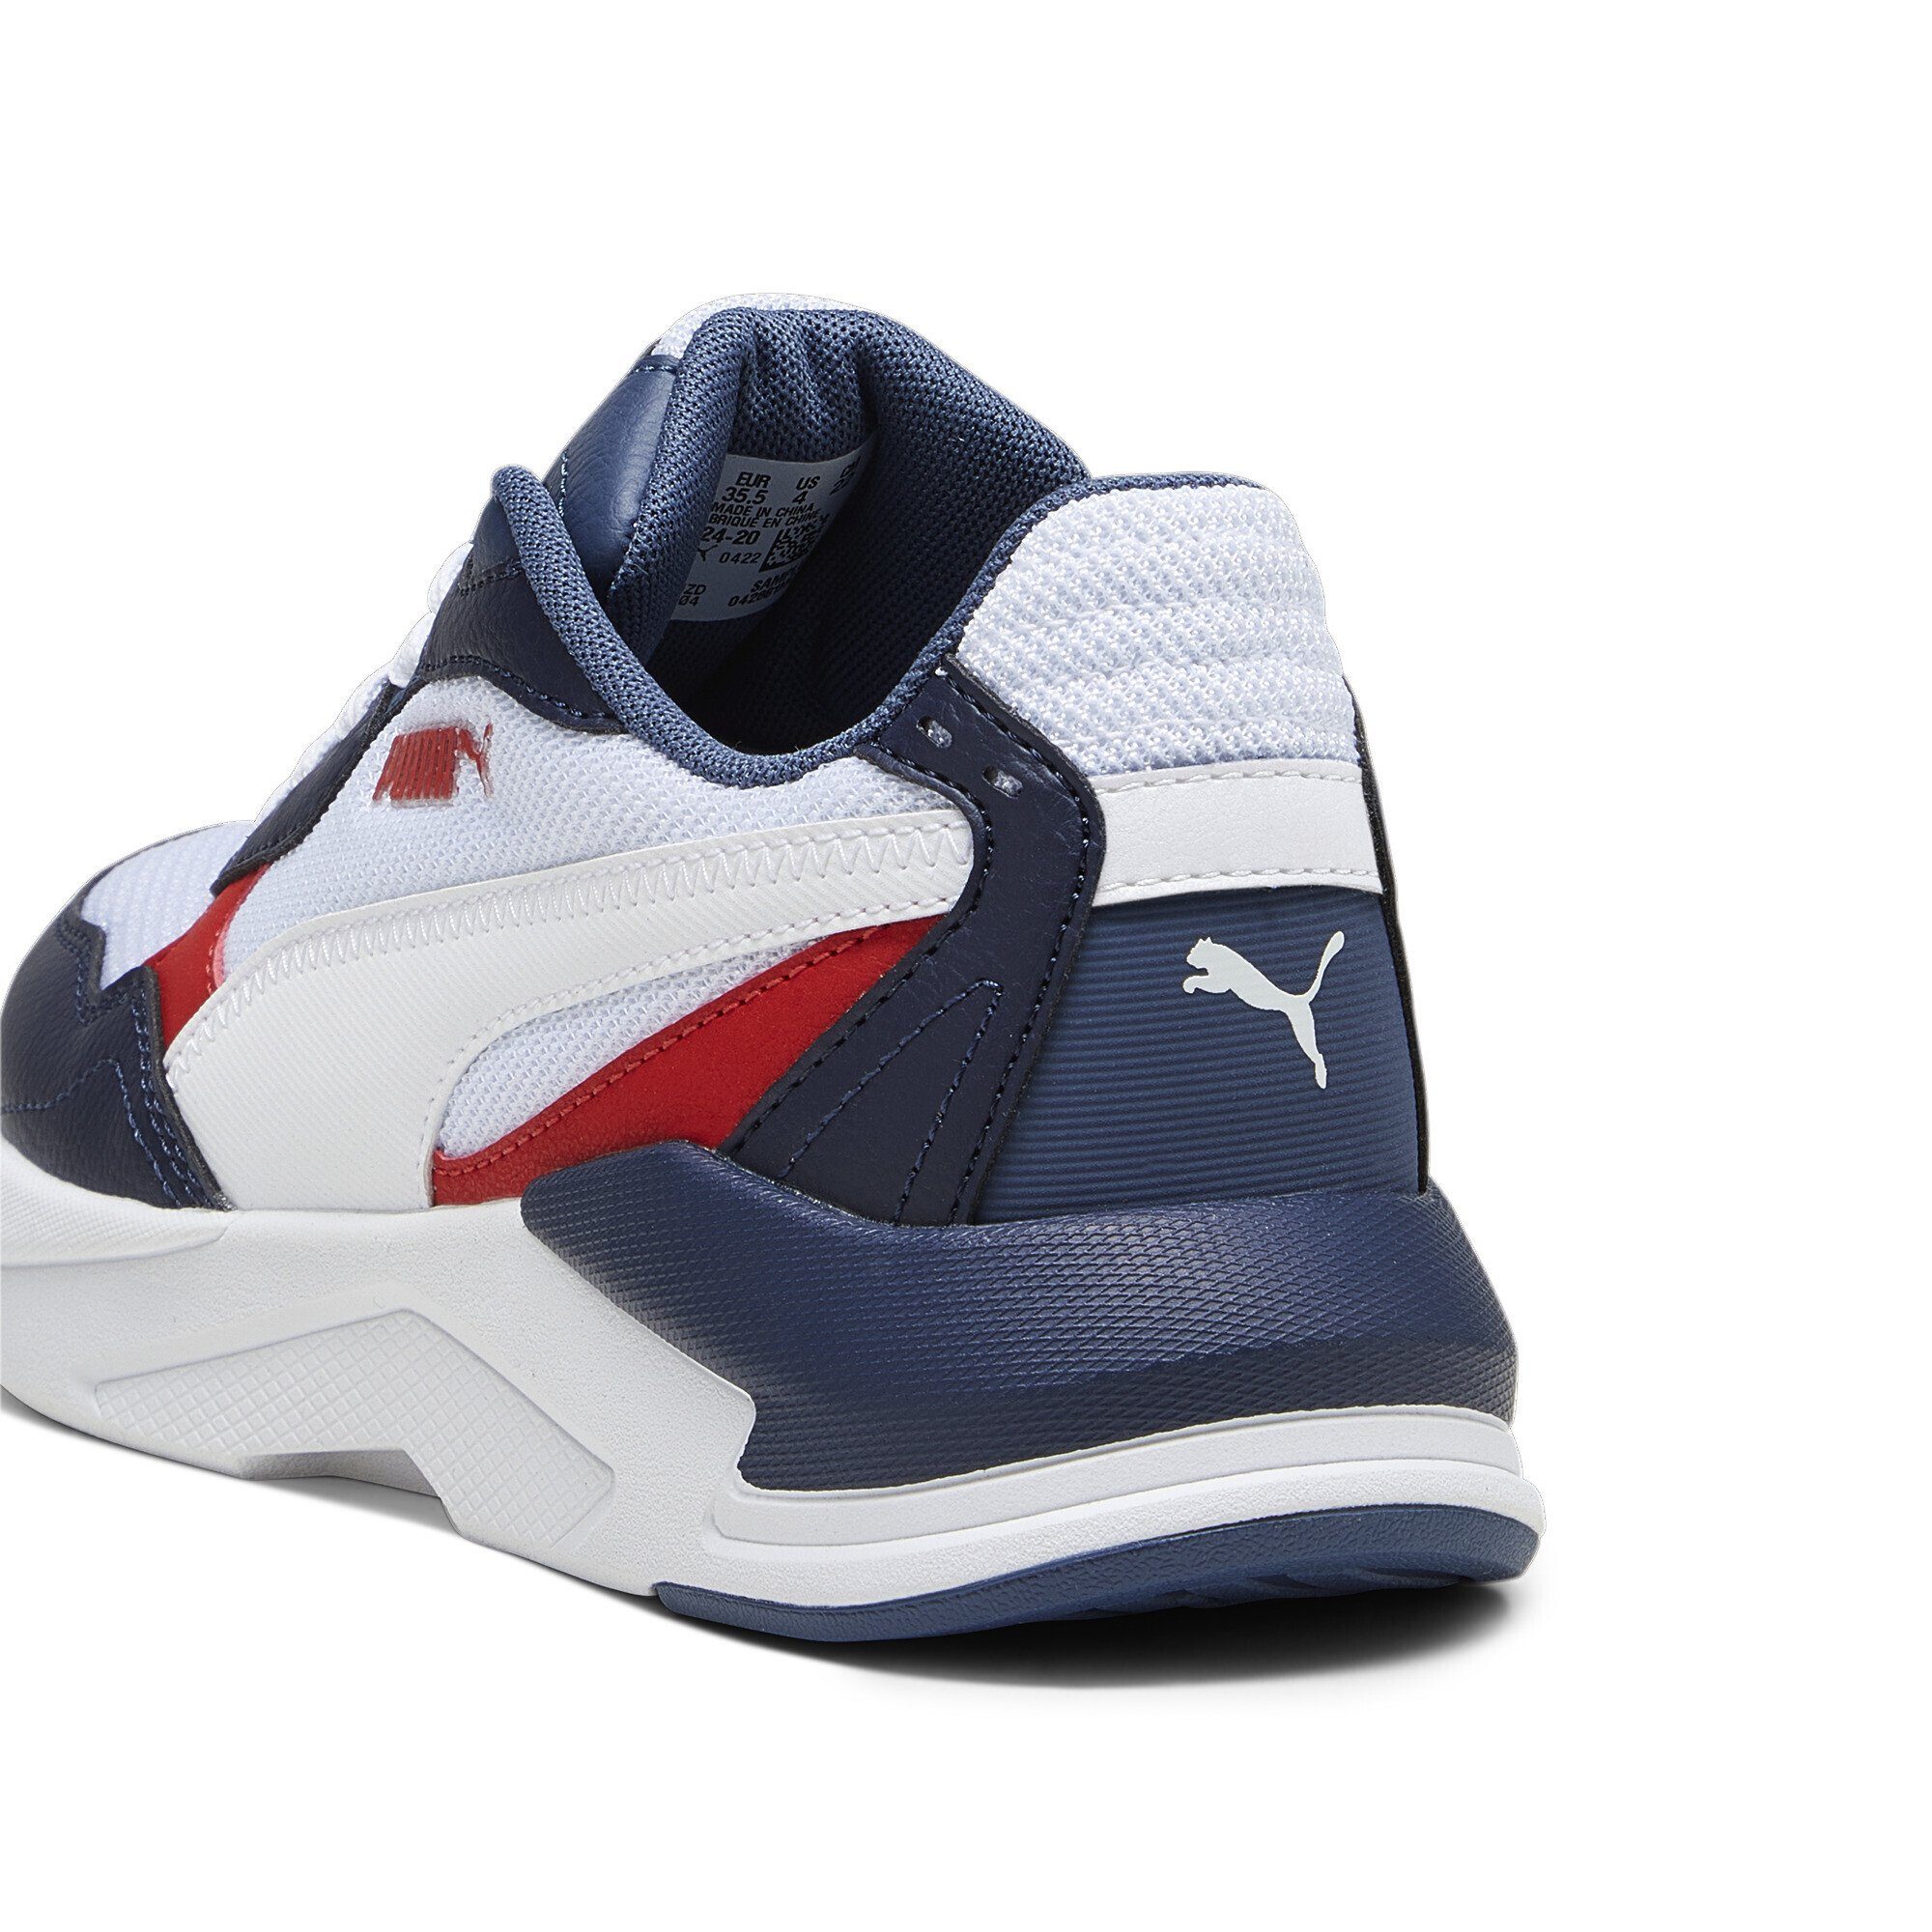 PUMA X-Ray Speed Lite Sneakers Sneaker White Red For Time Navy Jugendliche Blue All Inky